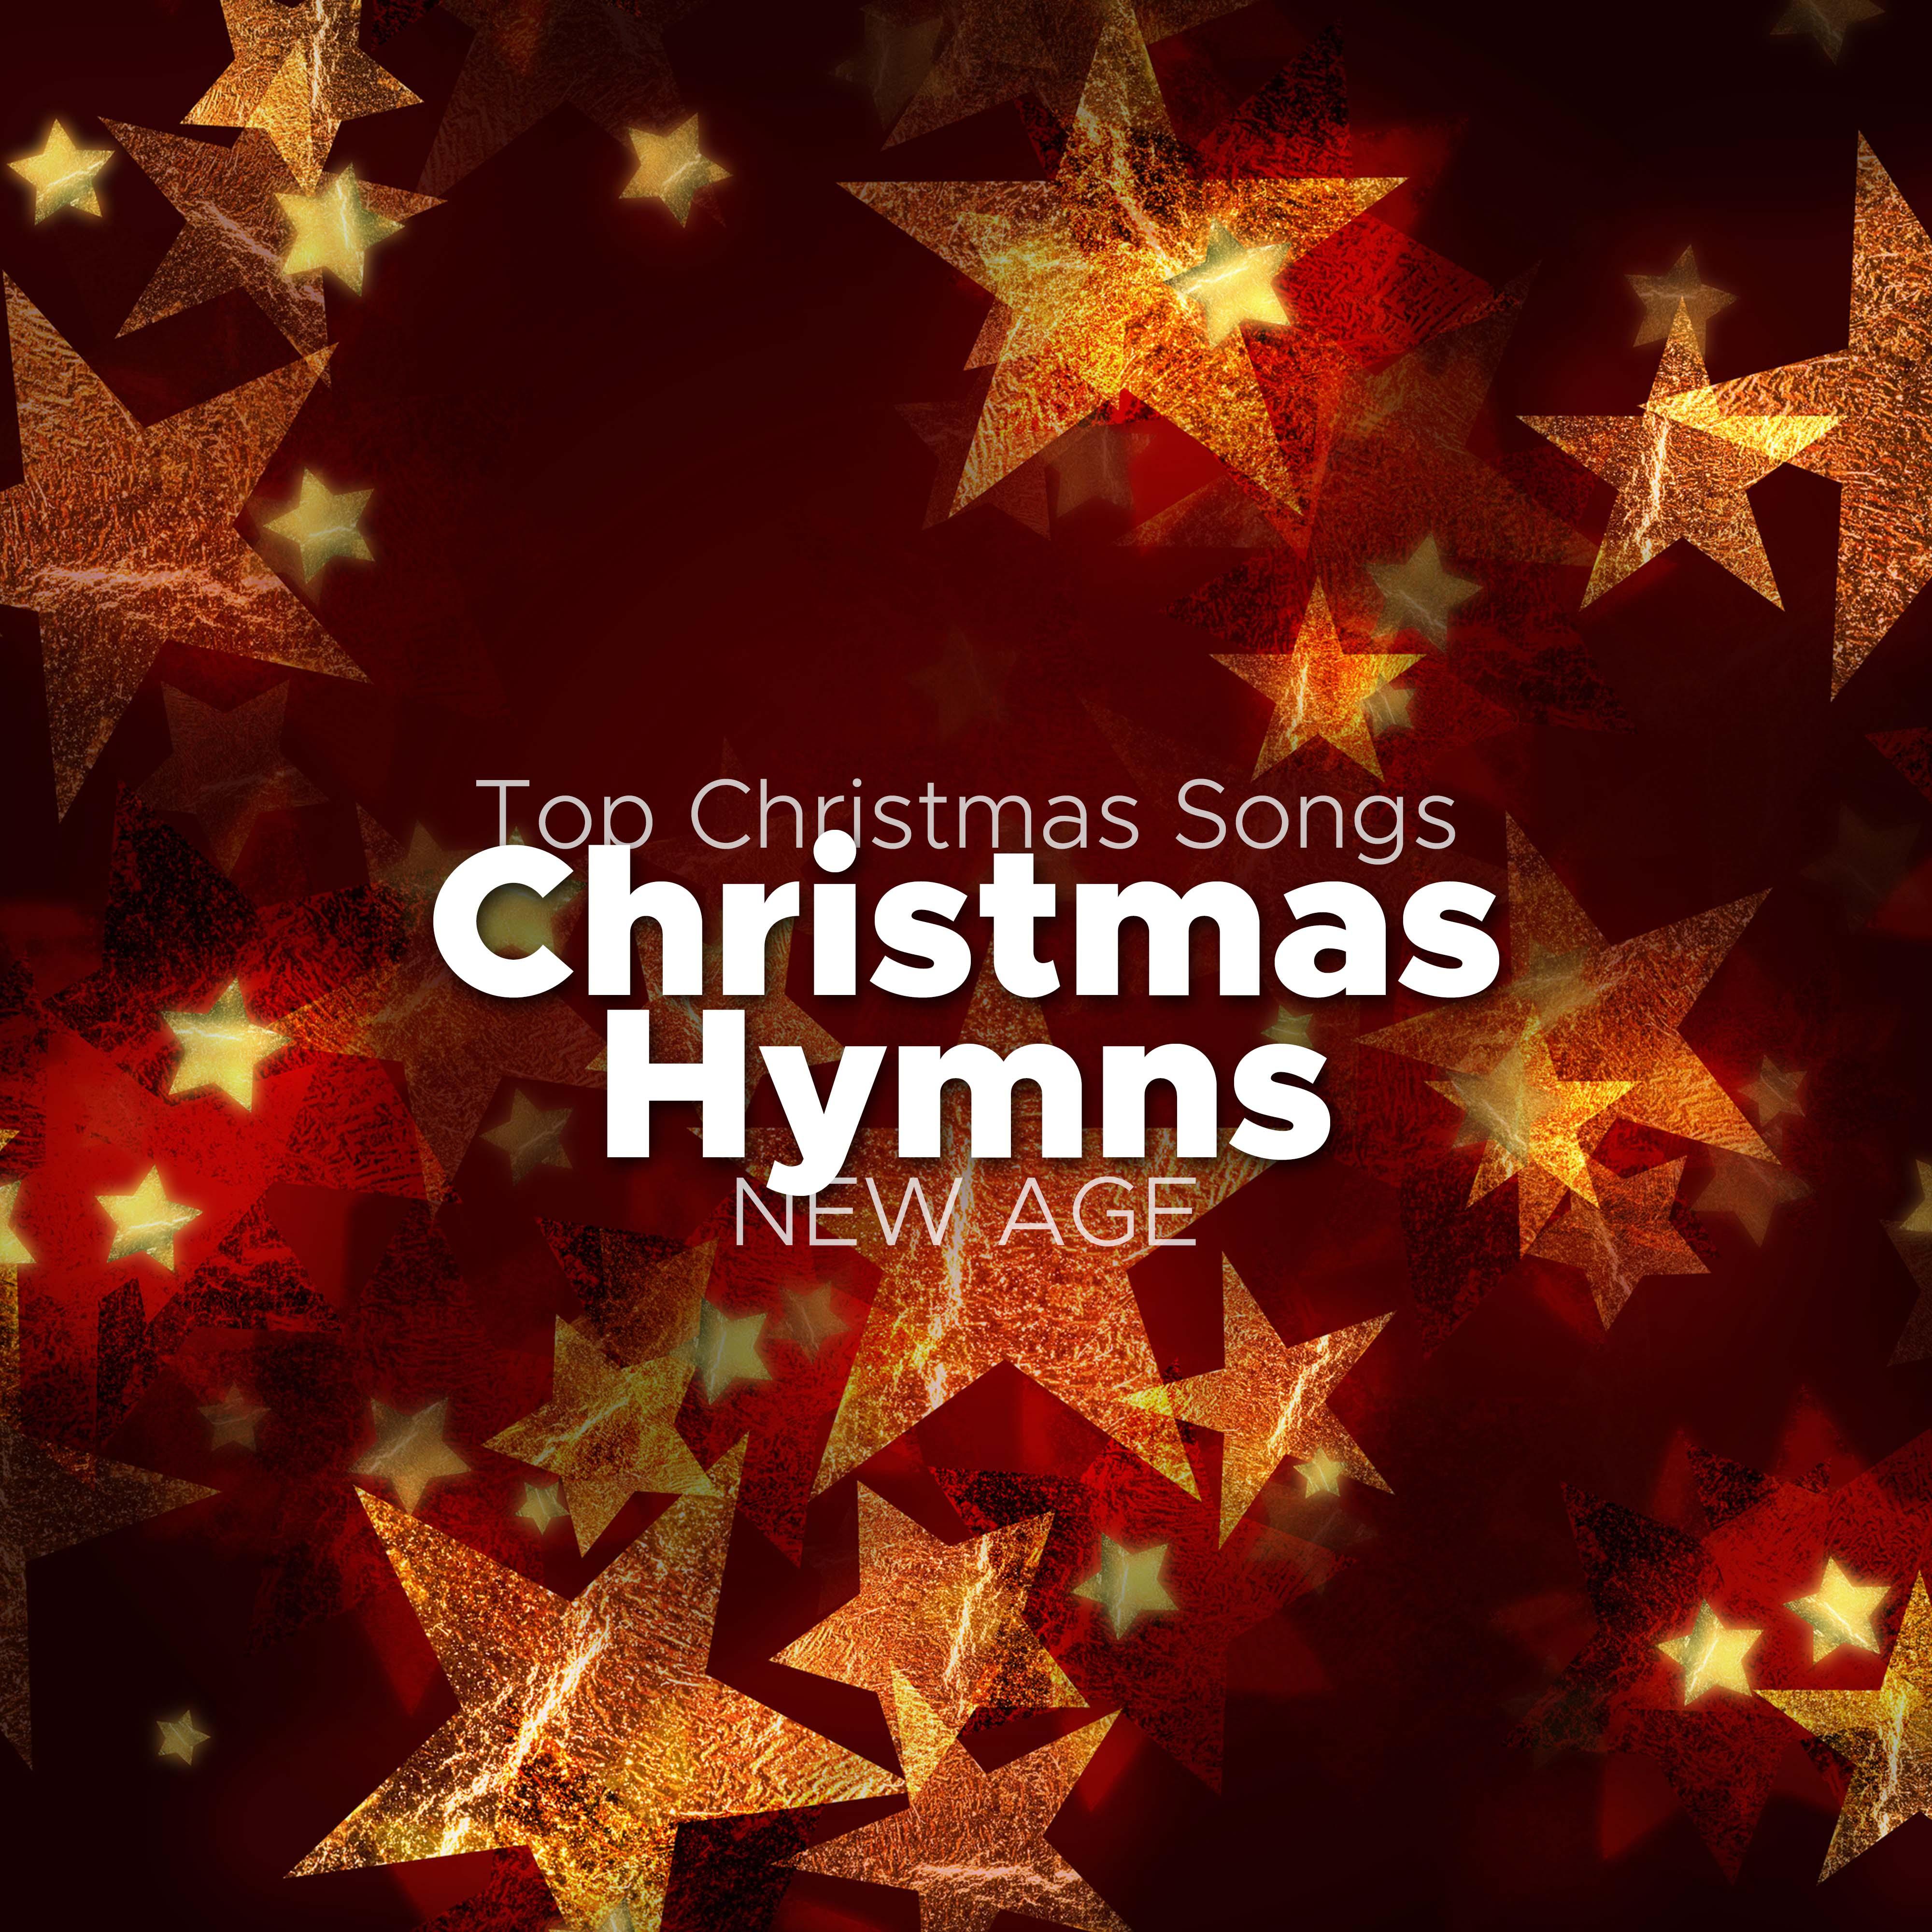 Christmas Hymns: Top Christmas Songs with Relaxing Instrumental Music and Piano Melodies